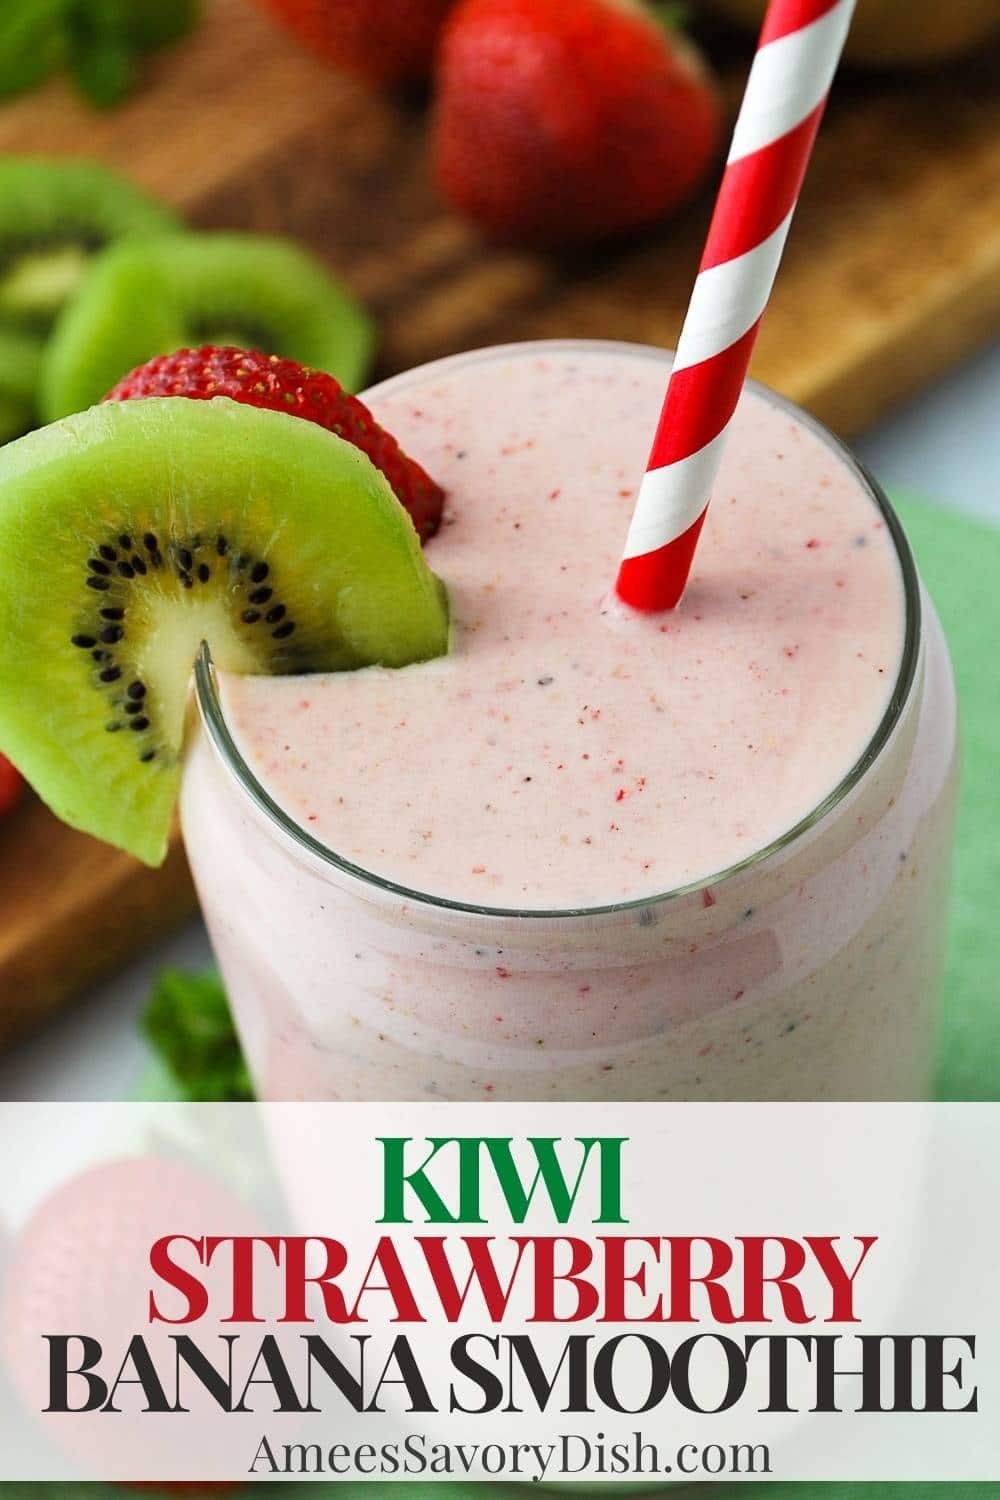 Relax and rejuvenate with a protein-packed Kiwi Strawberry Banana Smoothie. Delicious, healthy, and easy! via @Ameessavorydish